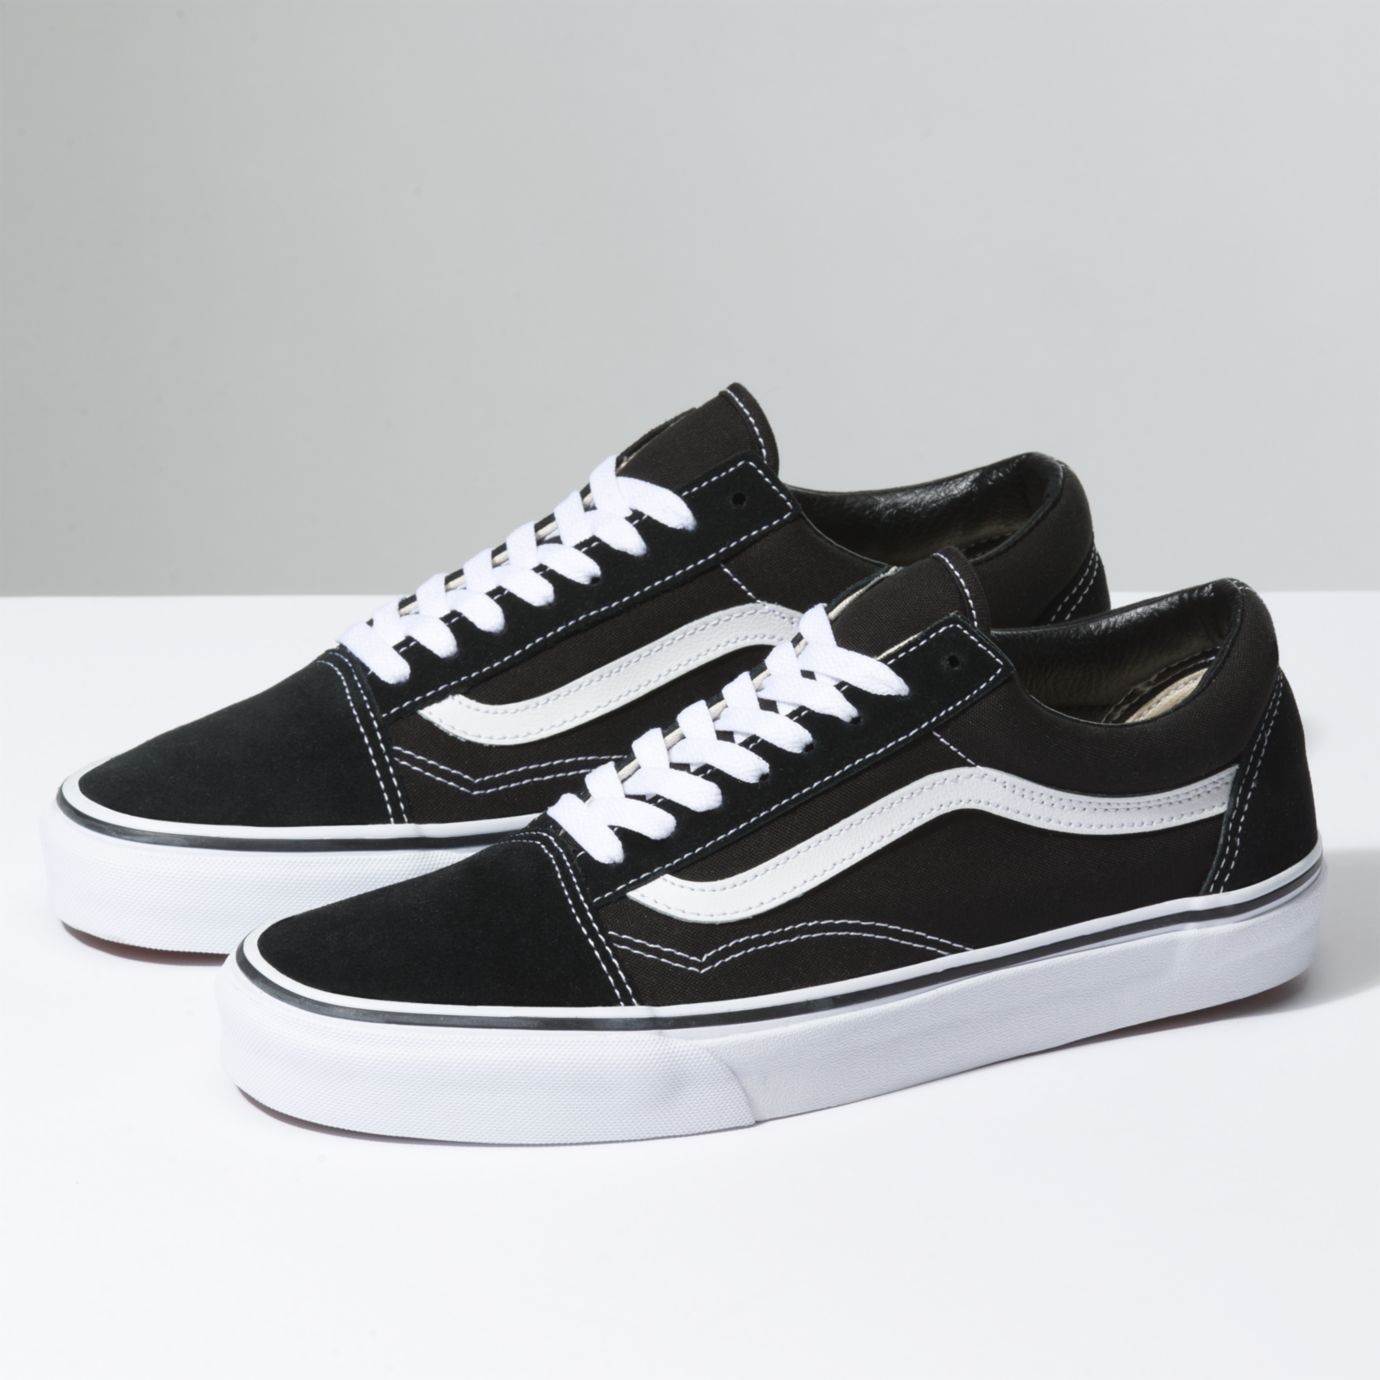 Vans classics collection and five footwear icons